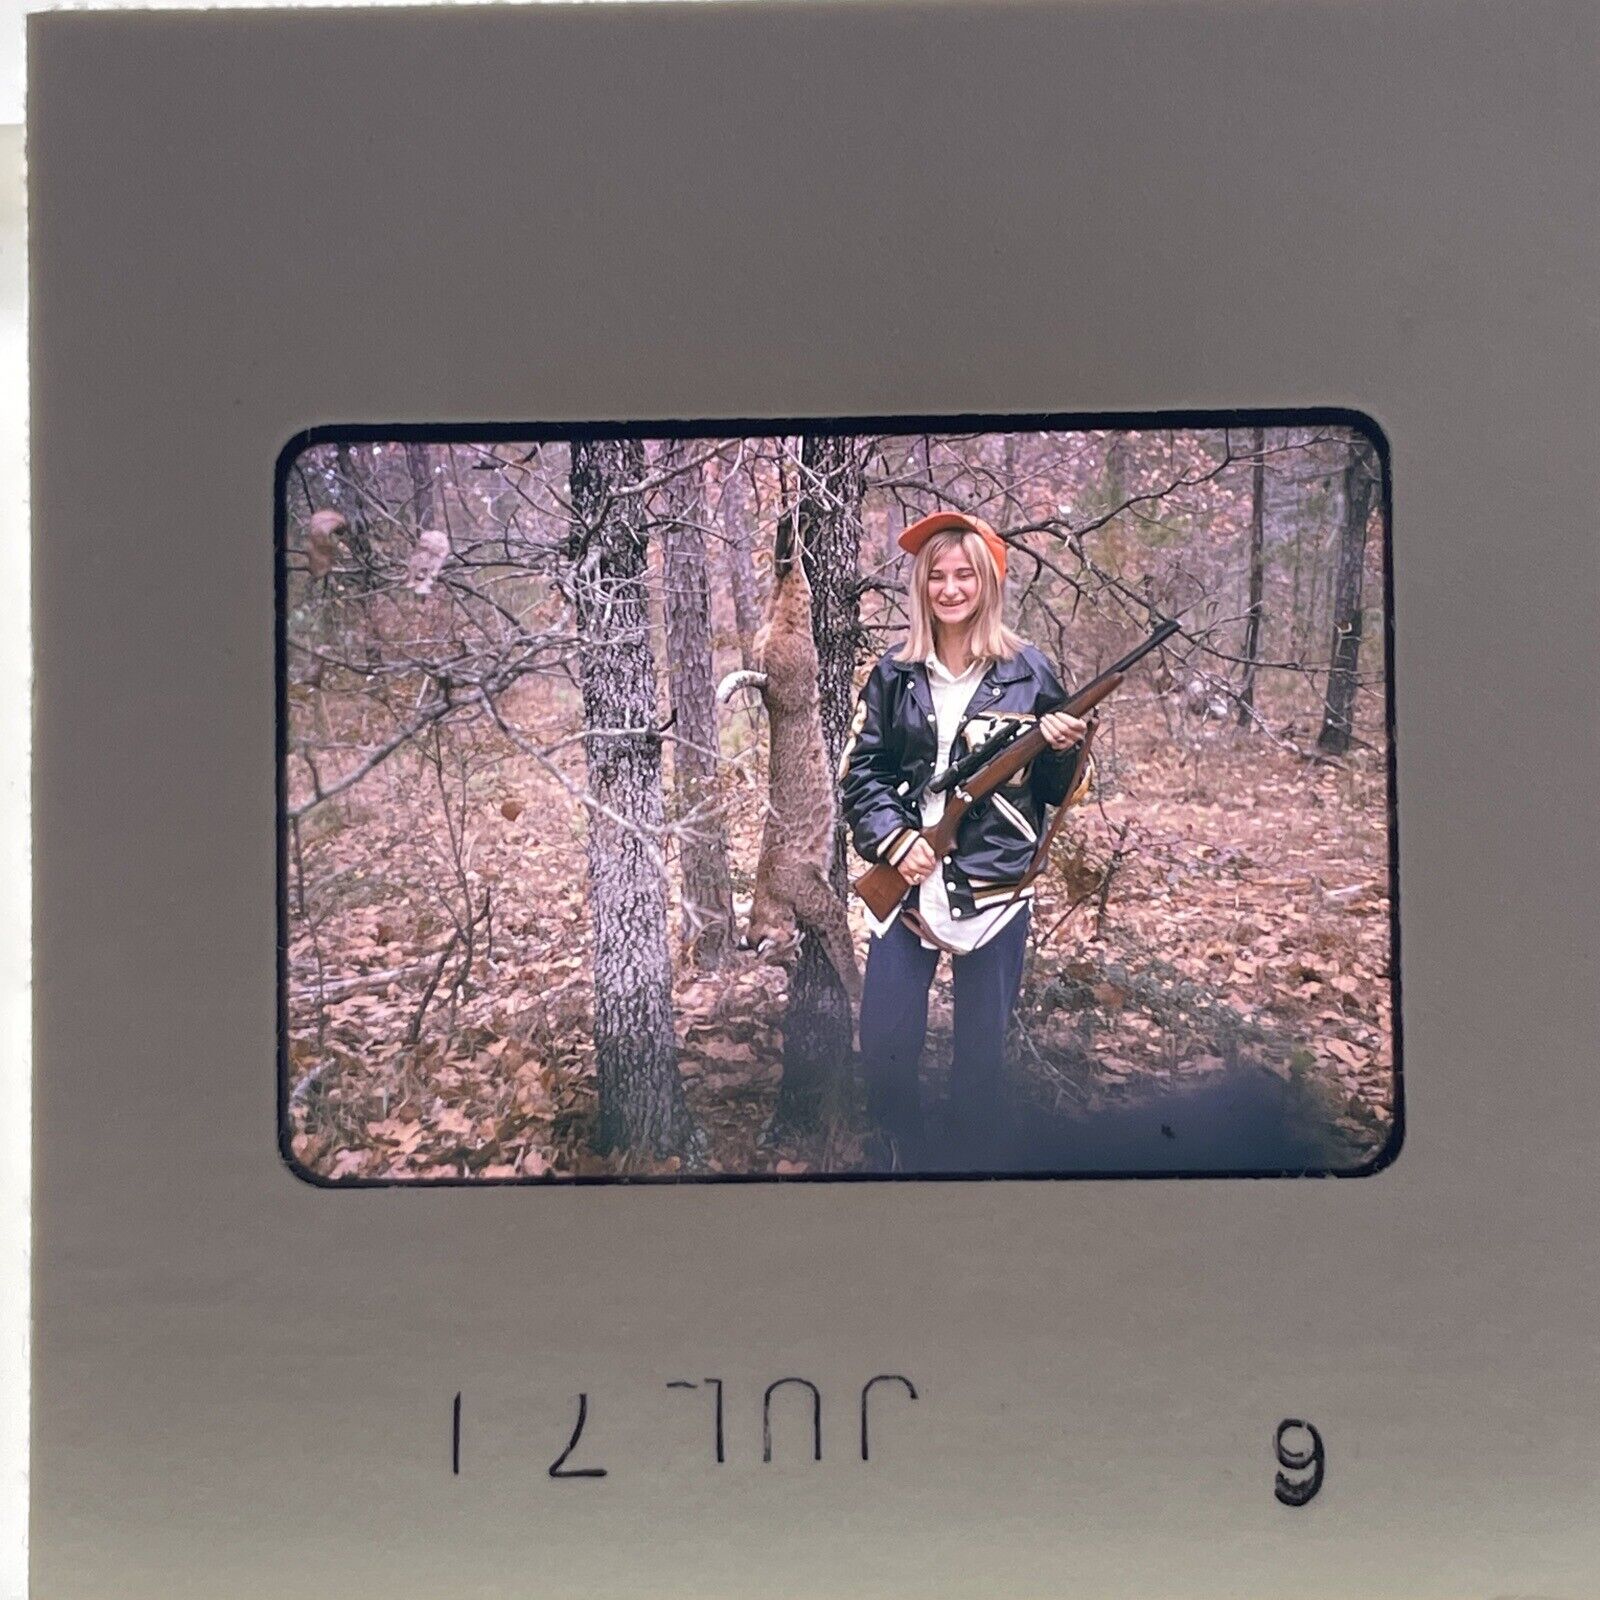 35mm Slide Young Woman Holding Hunting Rifle 1971 Color Photo Slide